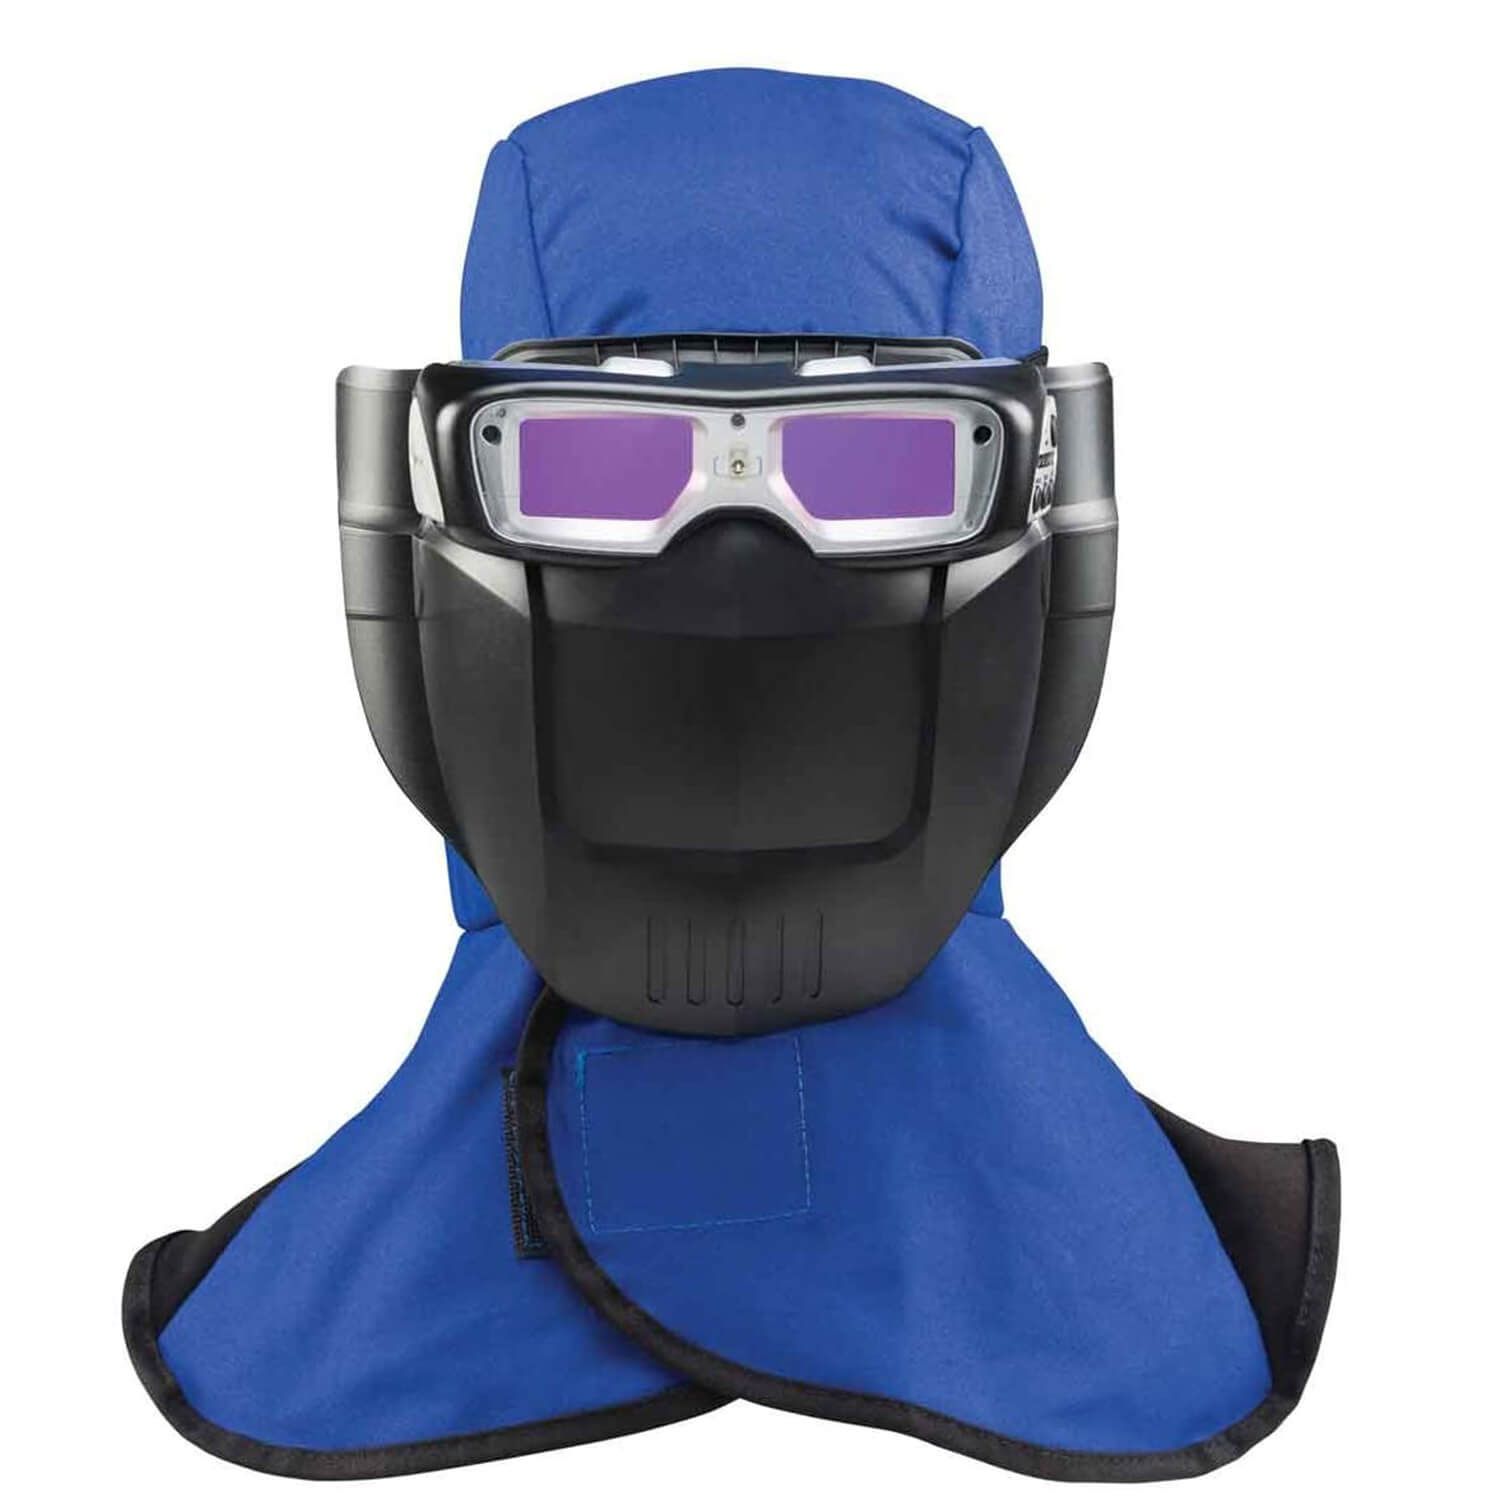 Welder Protective Goggles Automatic Dimming Eyes Protection Welding Accessories YZ05 for Electric Welding Gas Shielded Welding